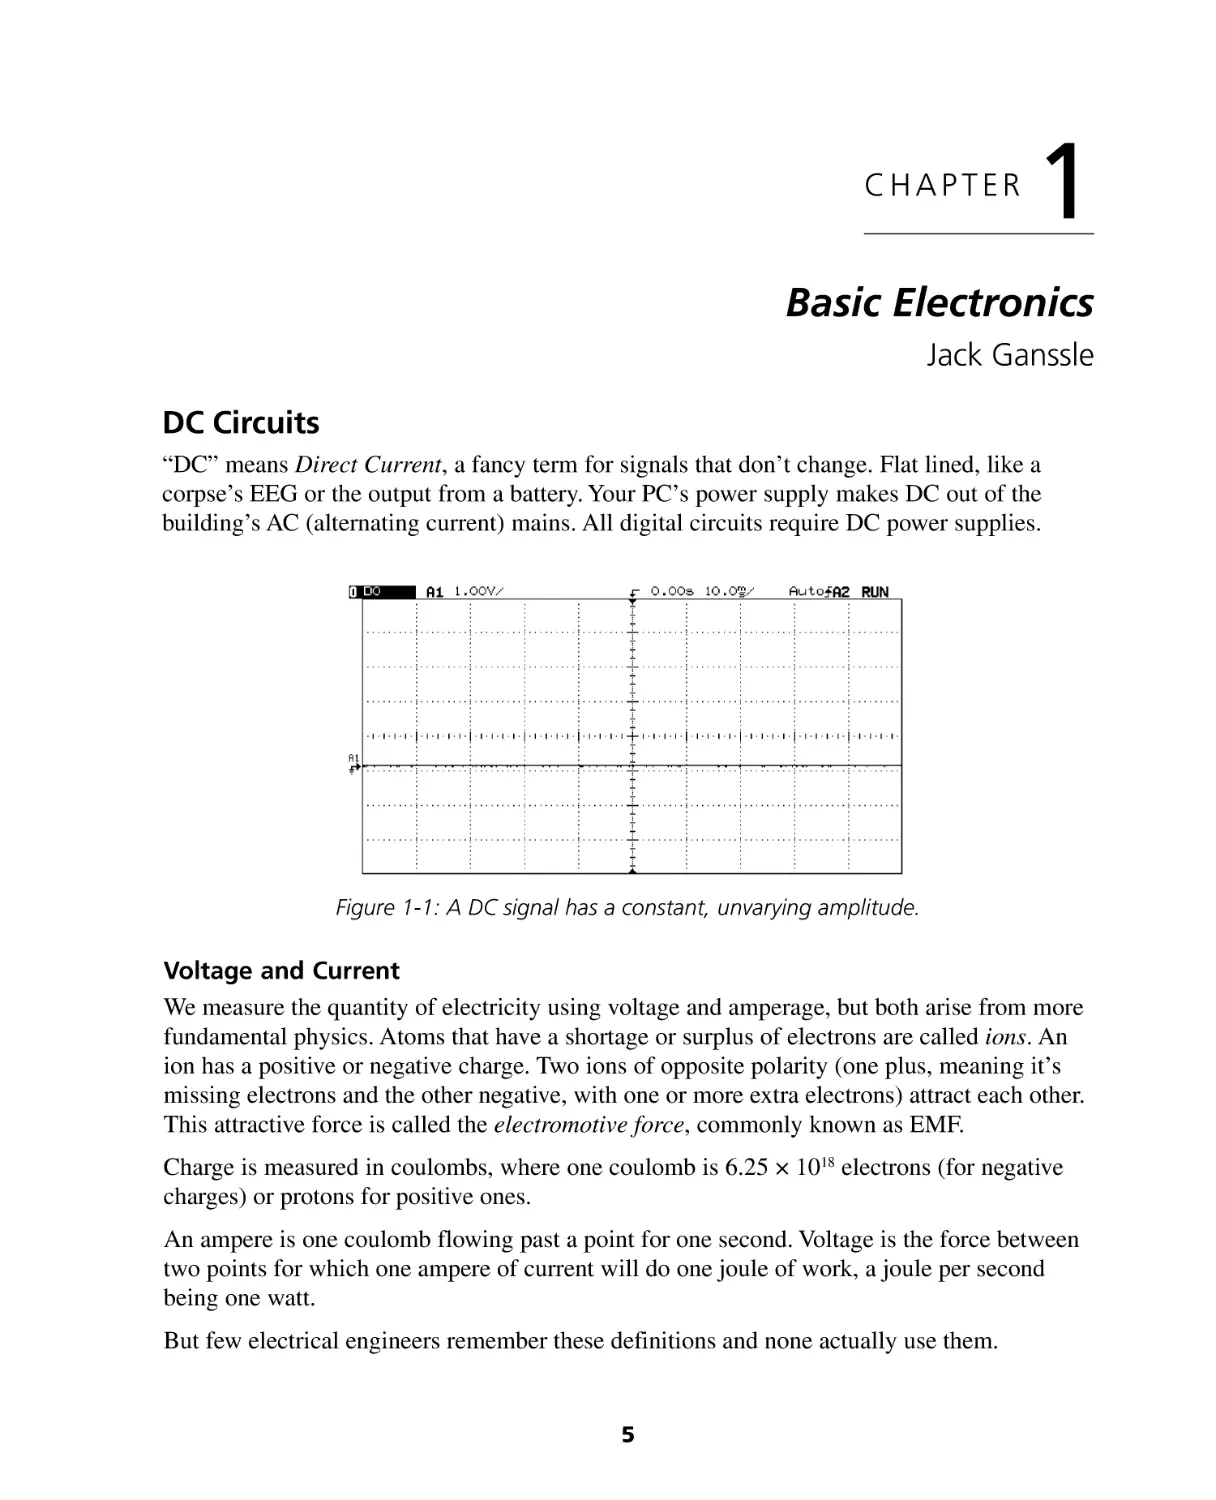 Chapter 1
DC Circuits